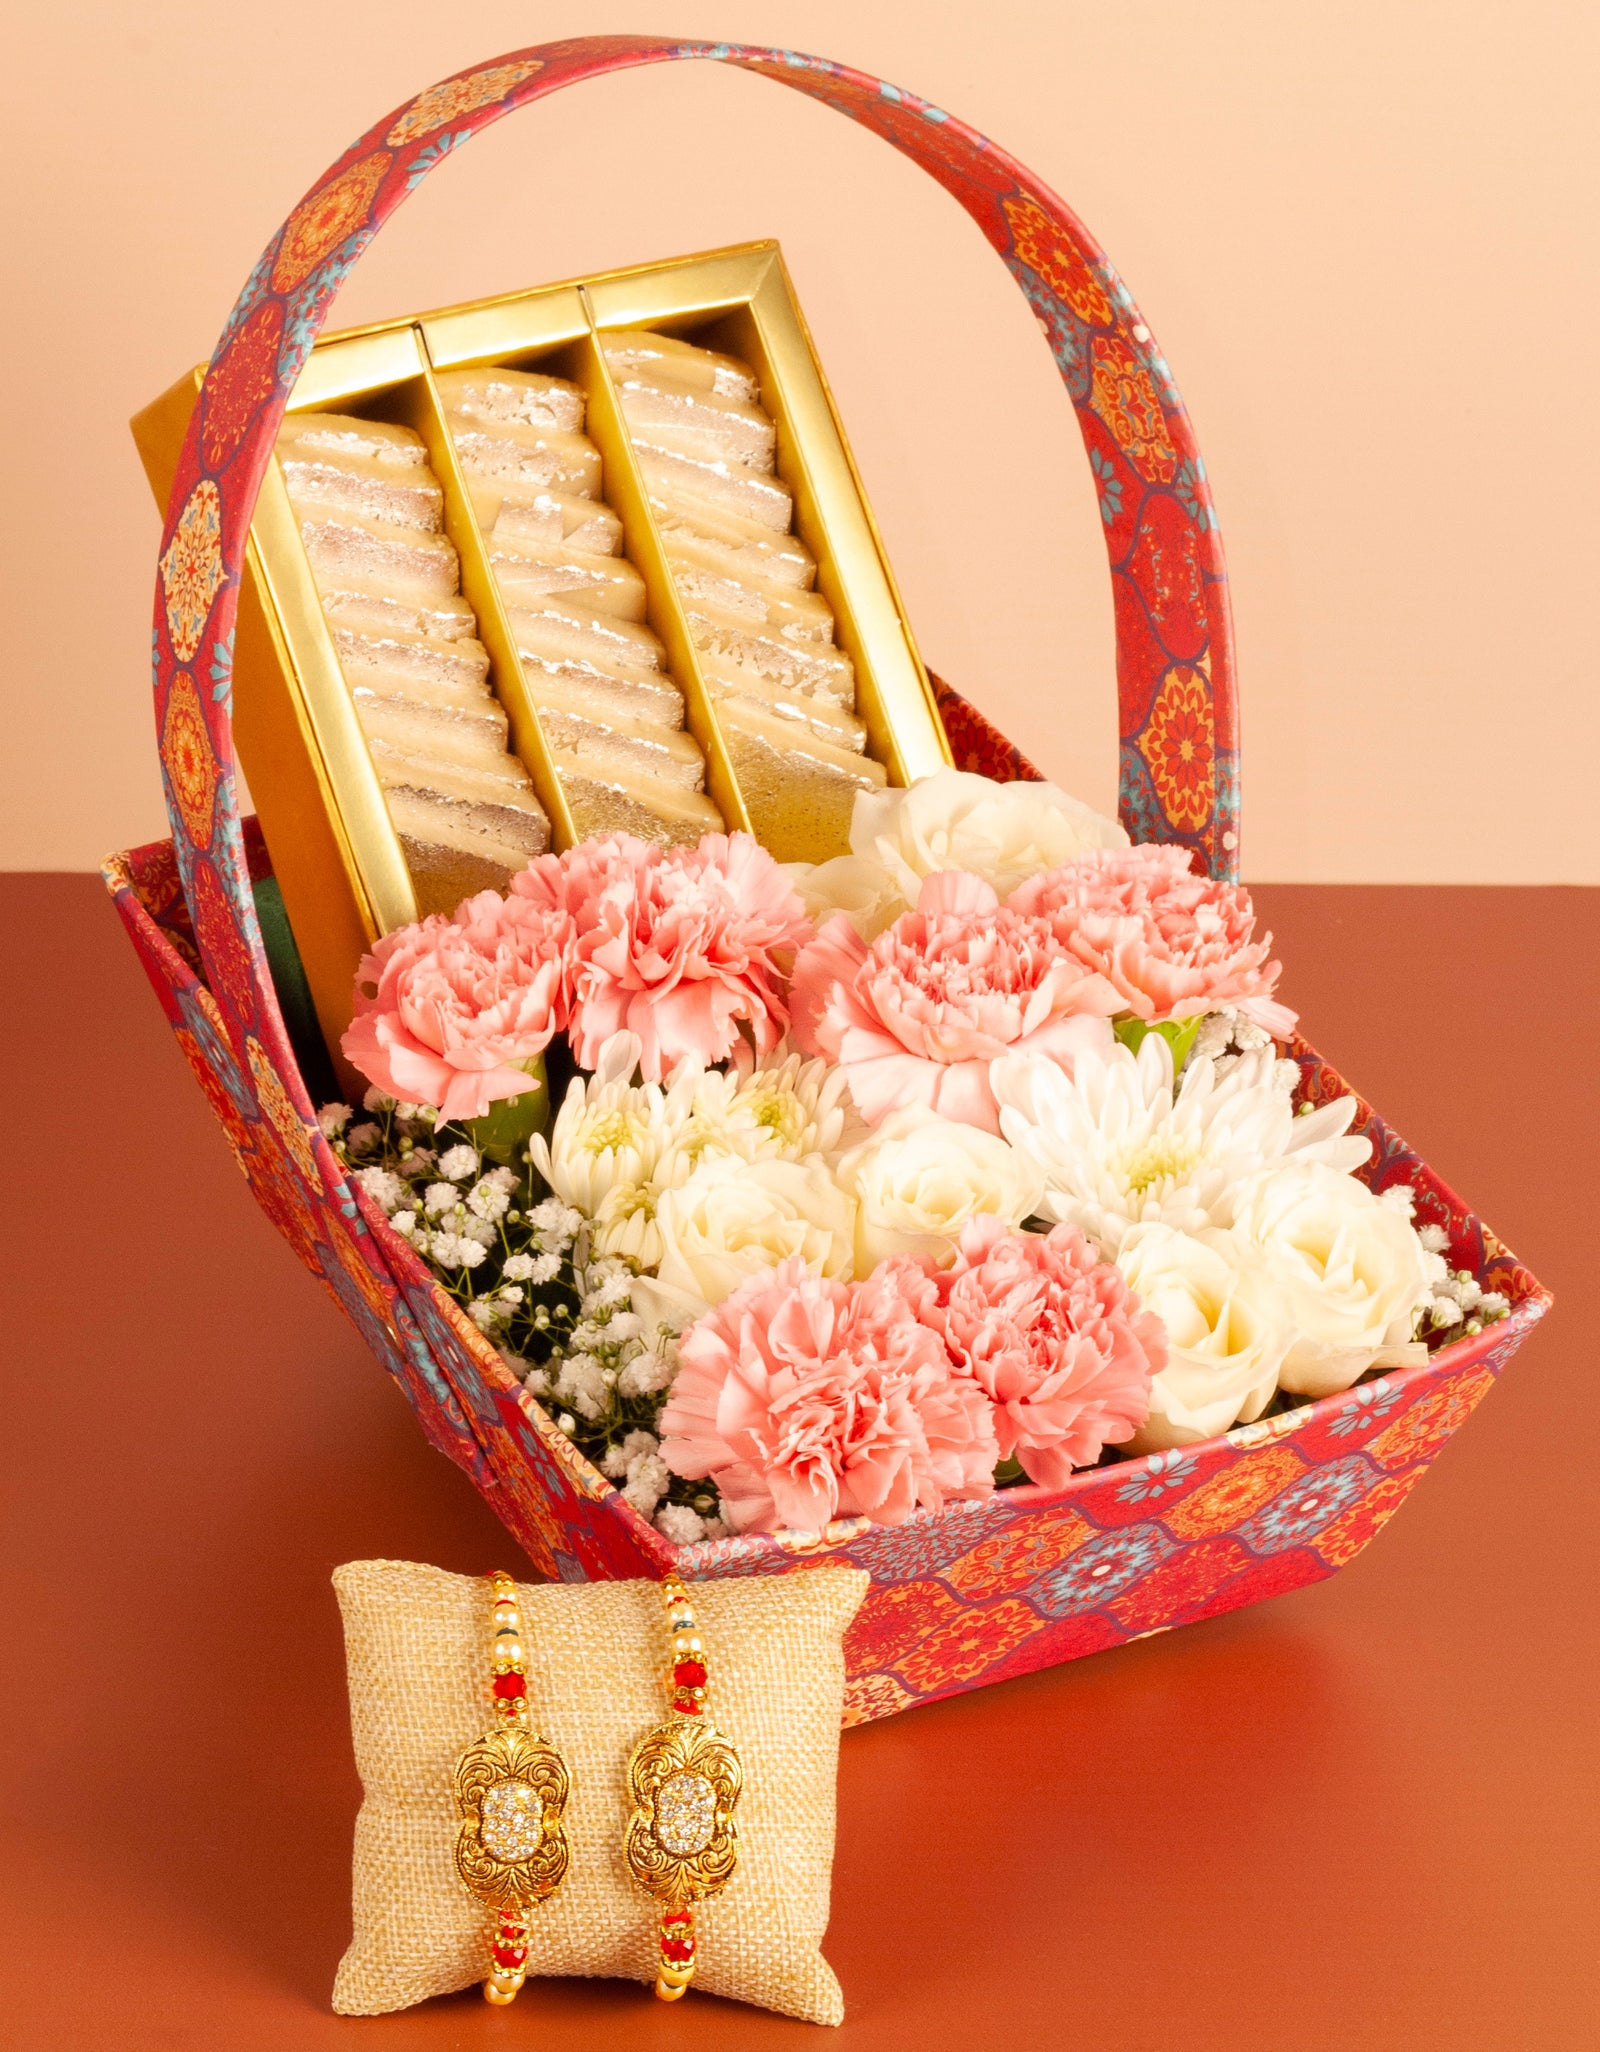 flower delivery pune - pink and white flowers, and sweet box arranged in a paper basket with rakhi